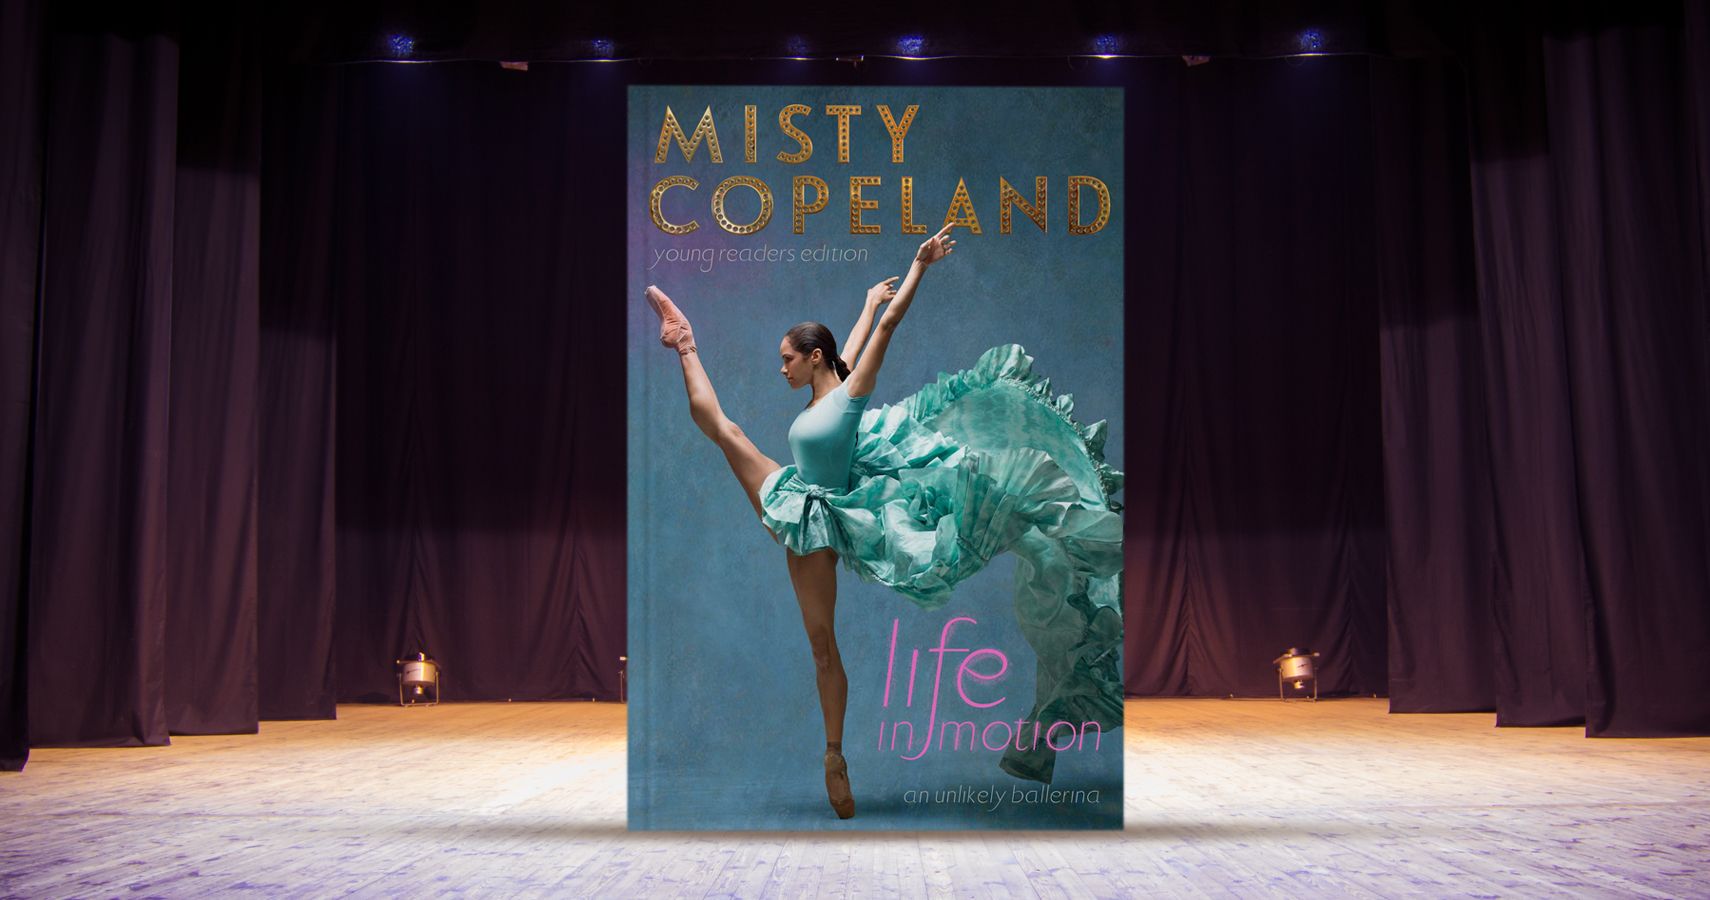 Misty Copeland Is Living Her Life In Motion